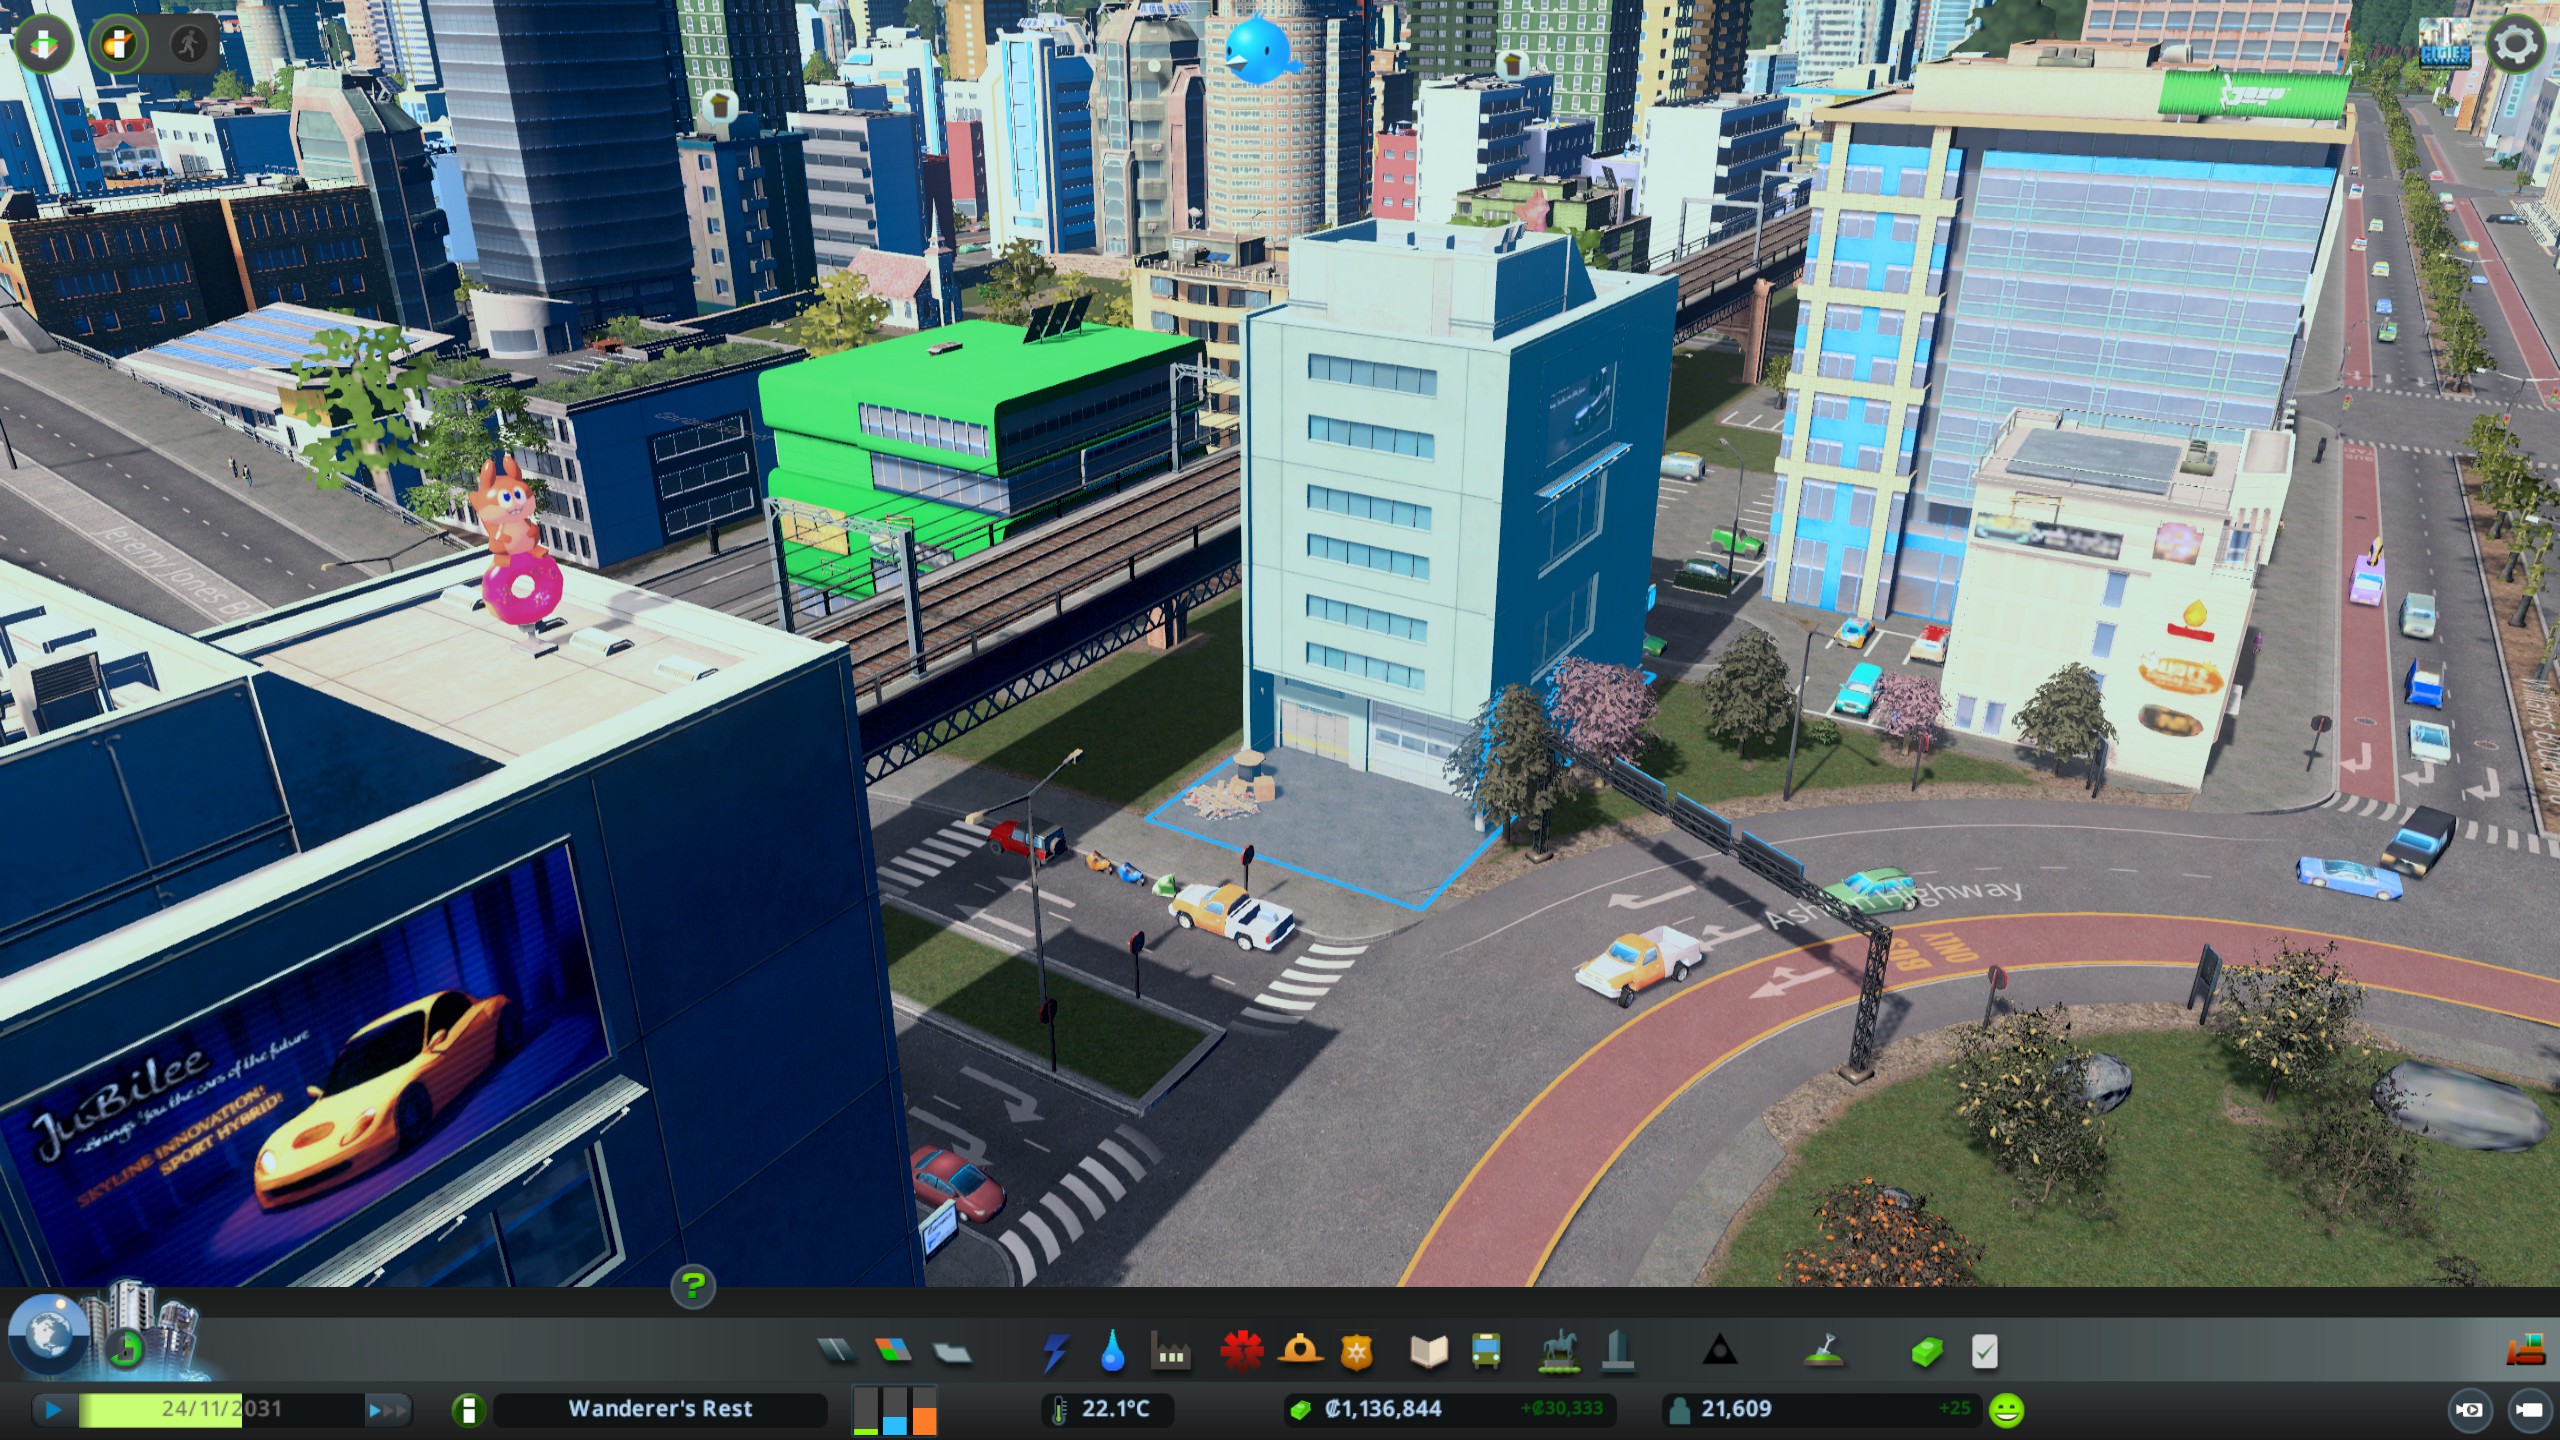 How to Use Paradox Mods in Cities: Skylines 2 - Prima Games